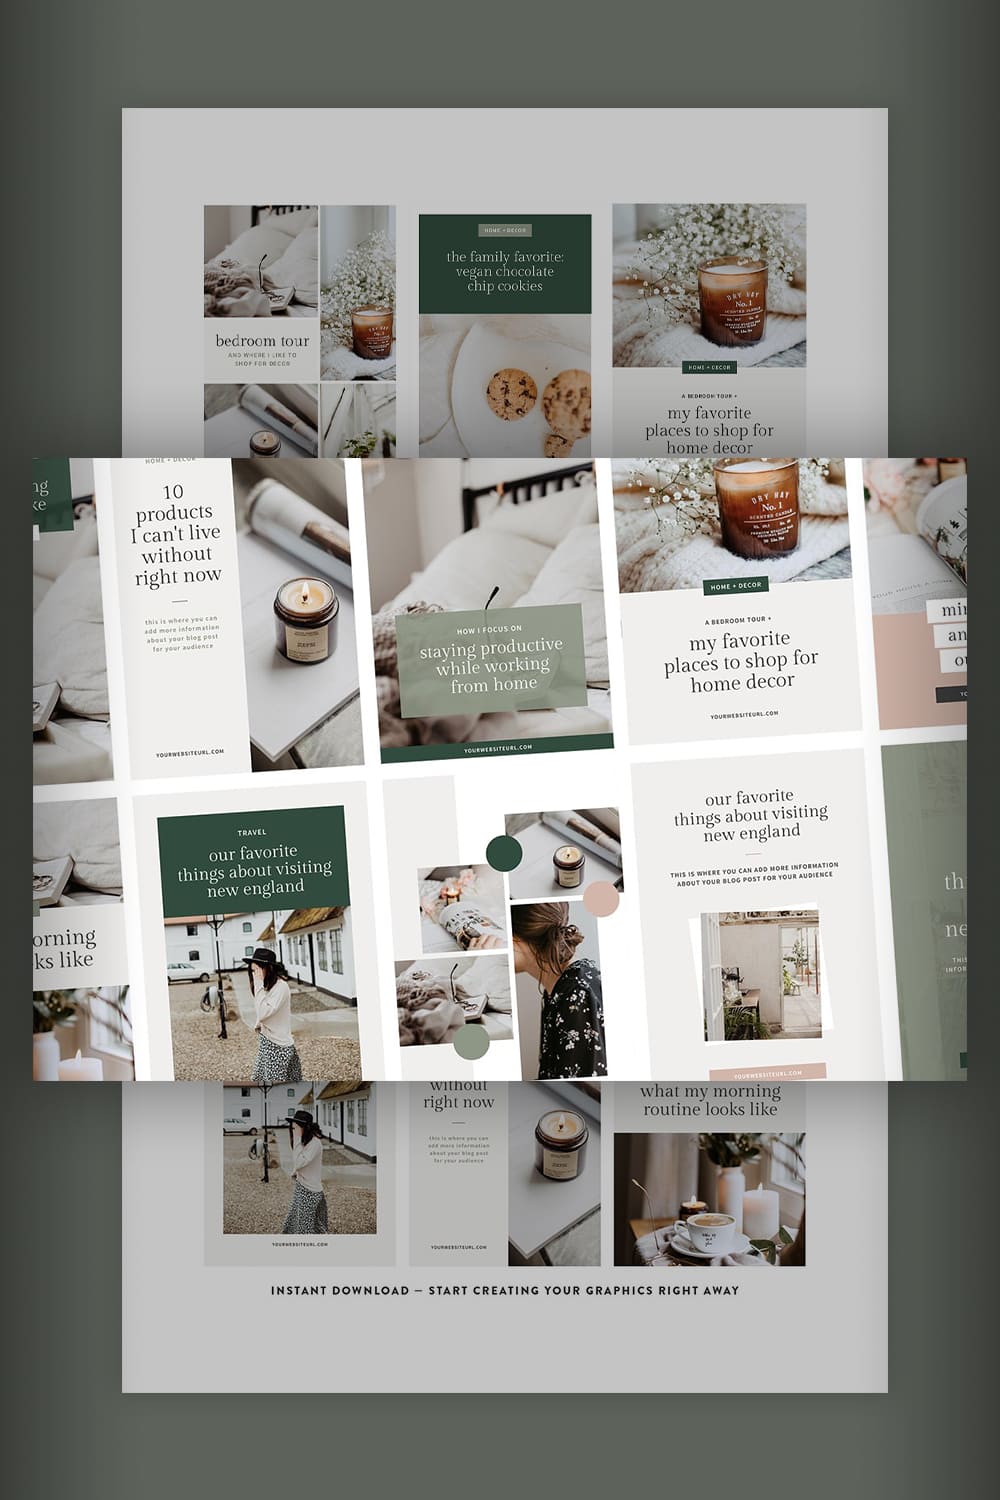 June Pinterest Templates -"Staying Productive While Working From Home".